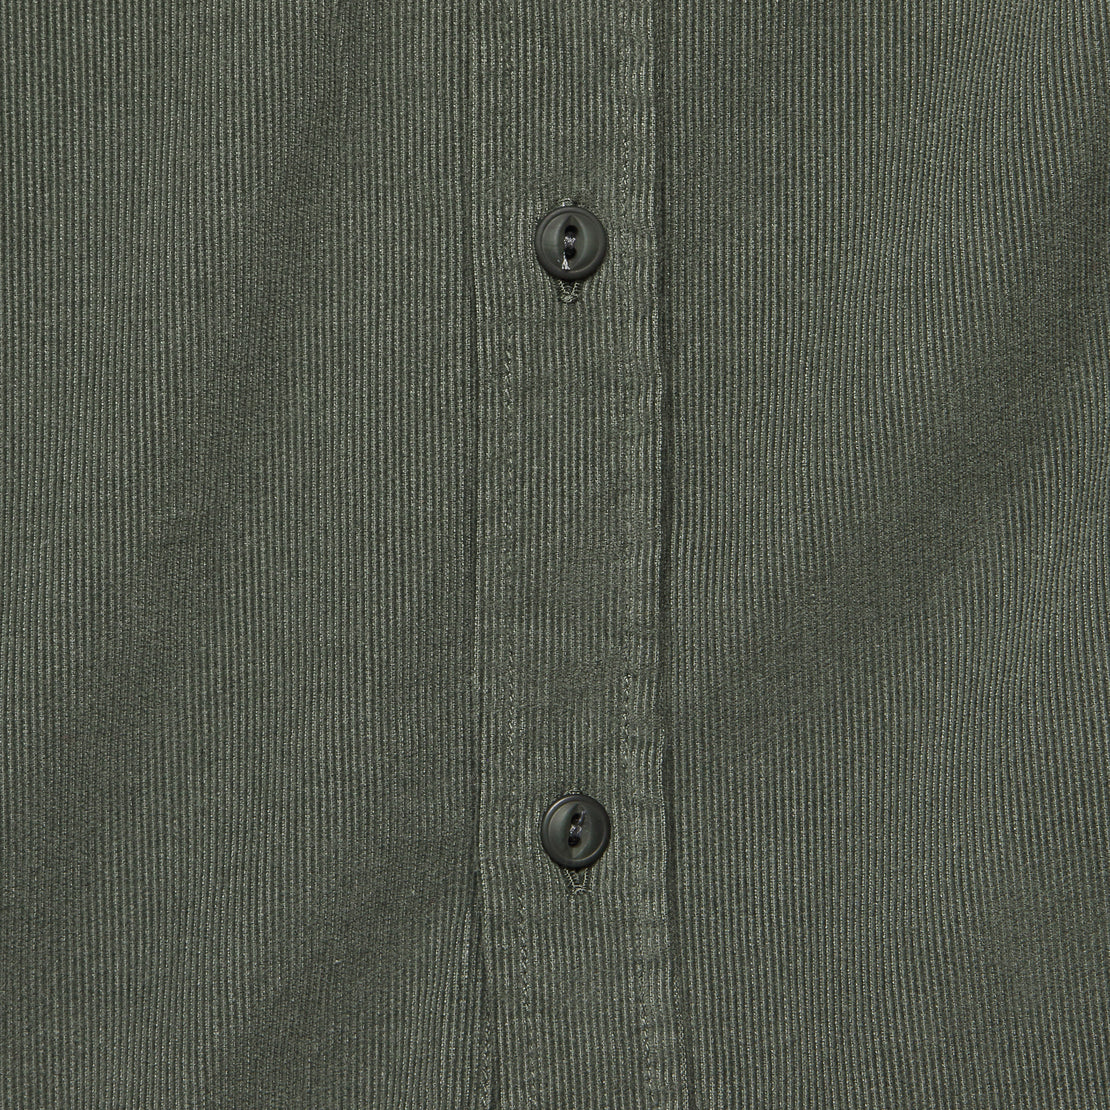 Cord Everyday Shirt - Charcoal - Universal Works - STAG Provisions - Tops - L/S Woven - Solid